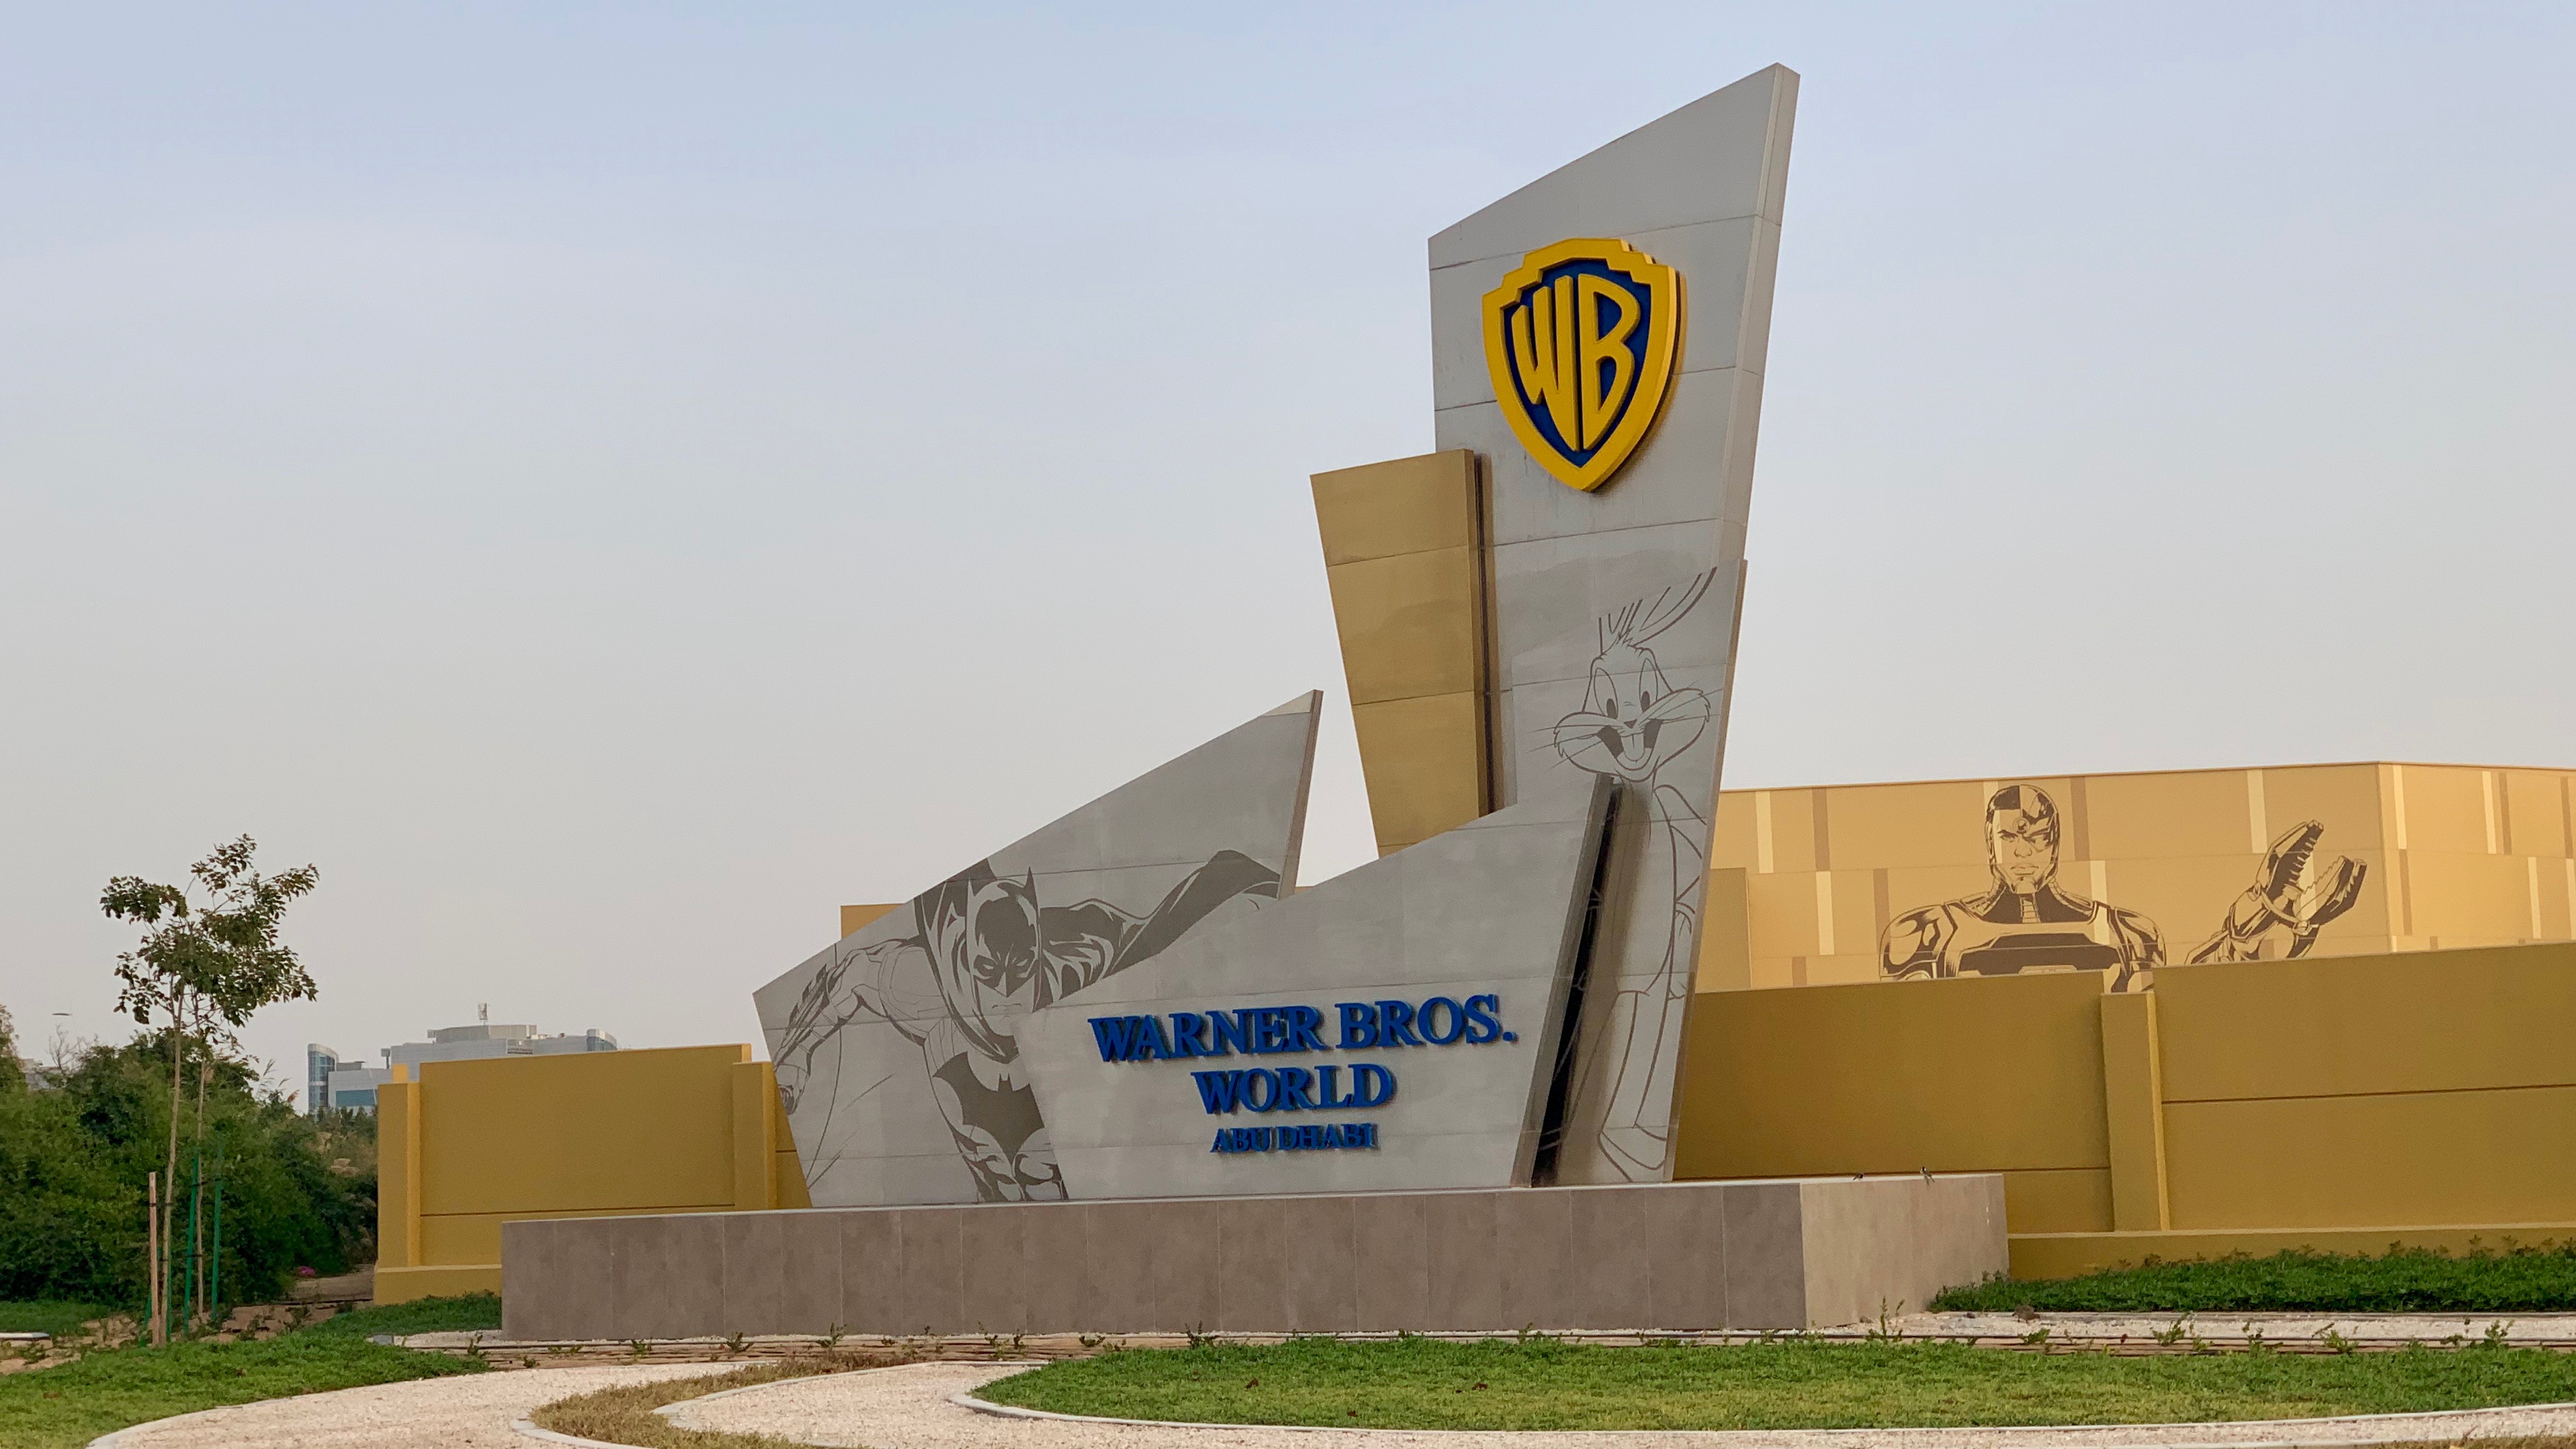 INDECT Parking Guidance System is a Success at Warner Bros. World, Abu Dhabi